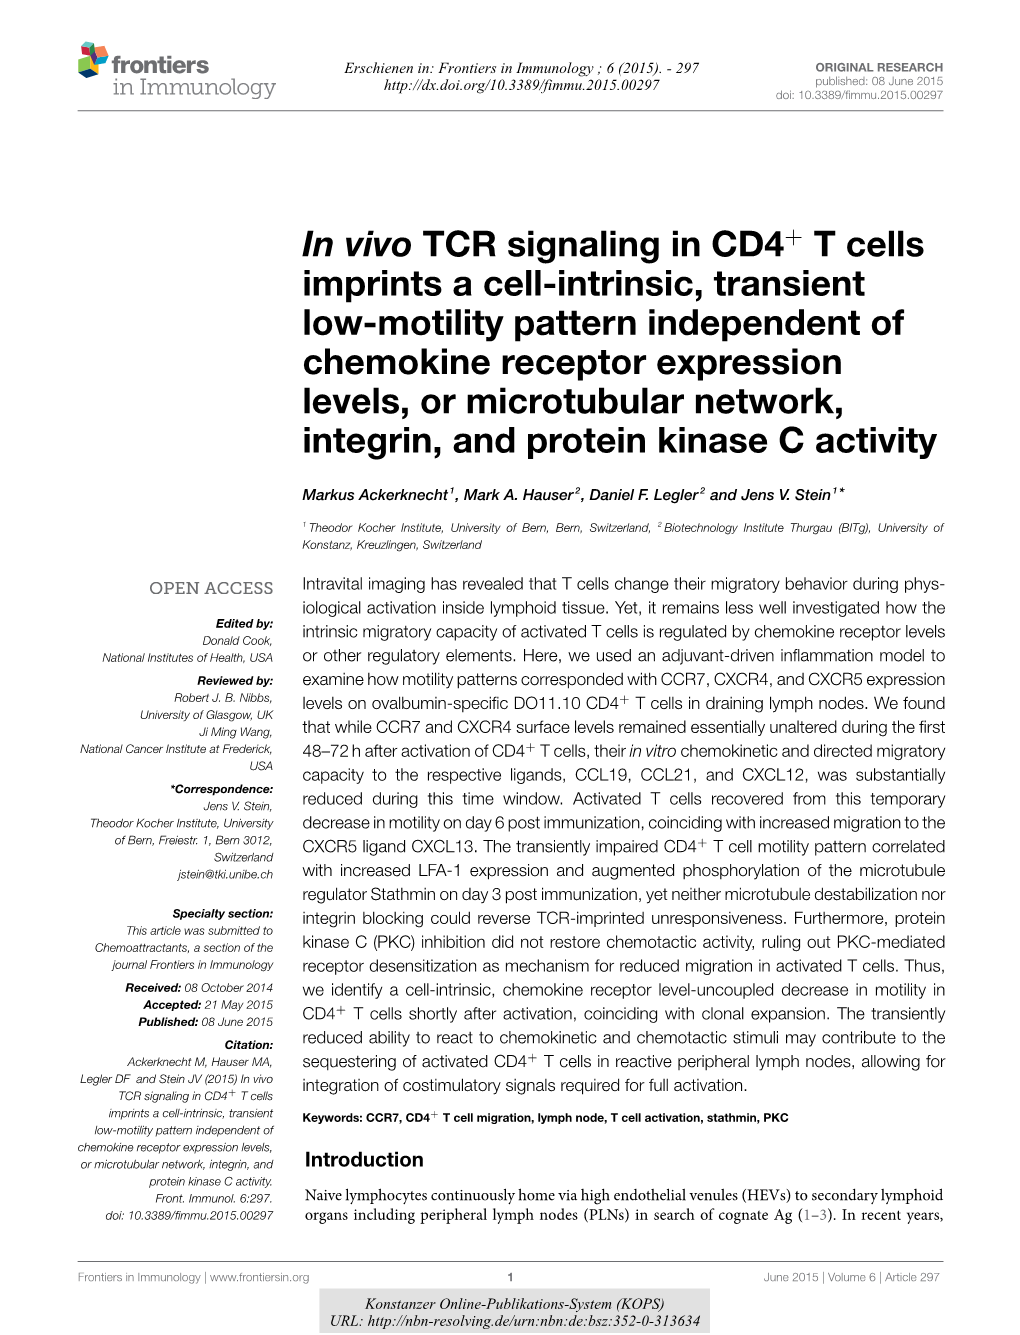 In Vivo TCR Signaling in CD4+ T Cells Imprints a Cell-Intrinsic, Transient